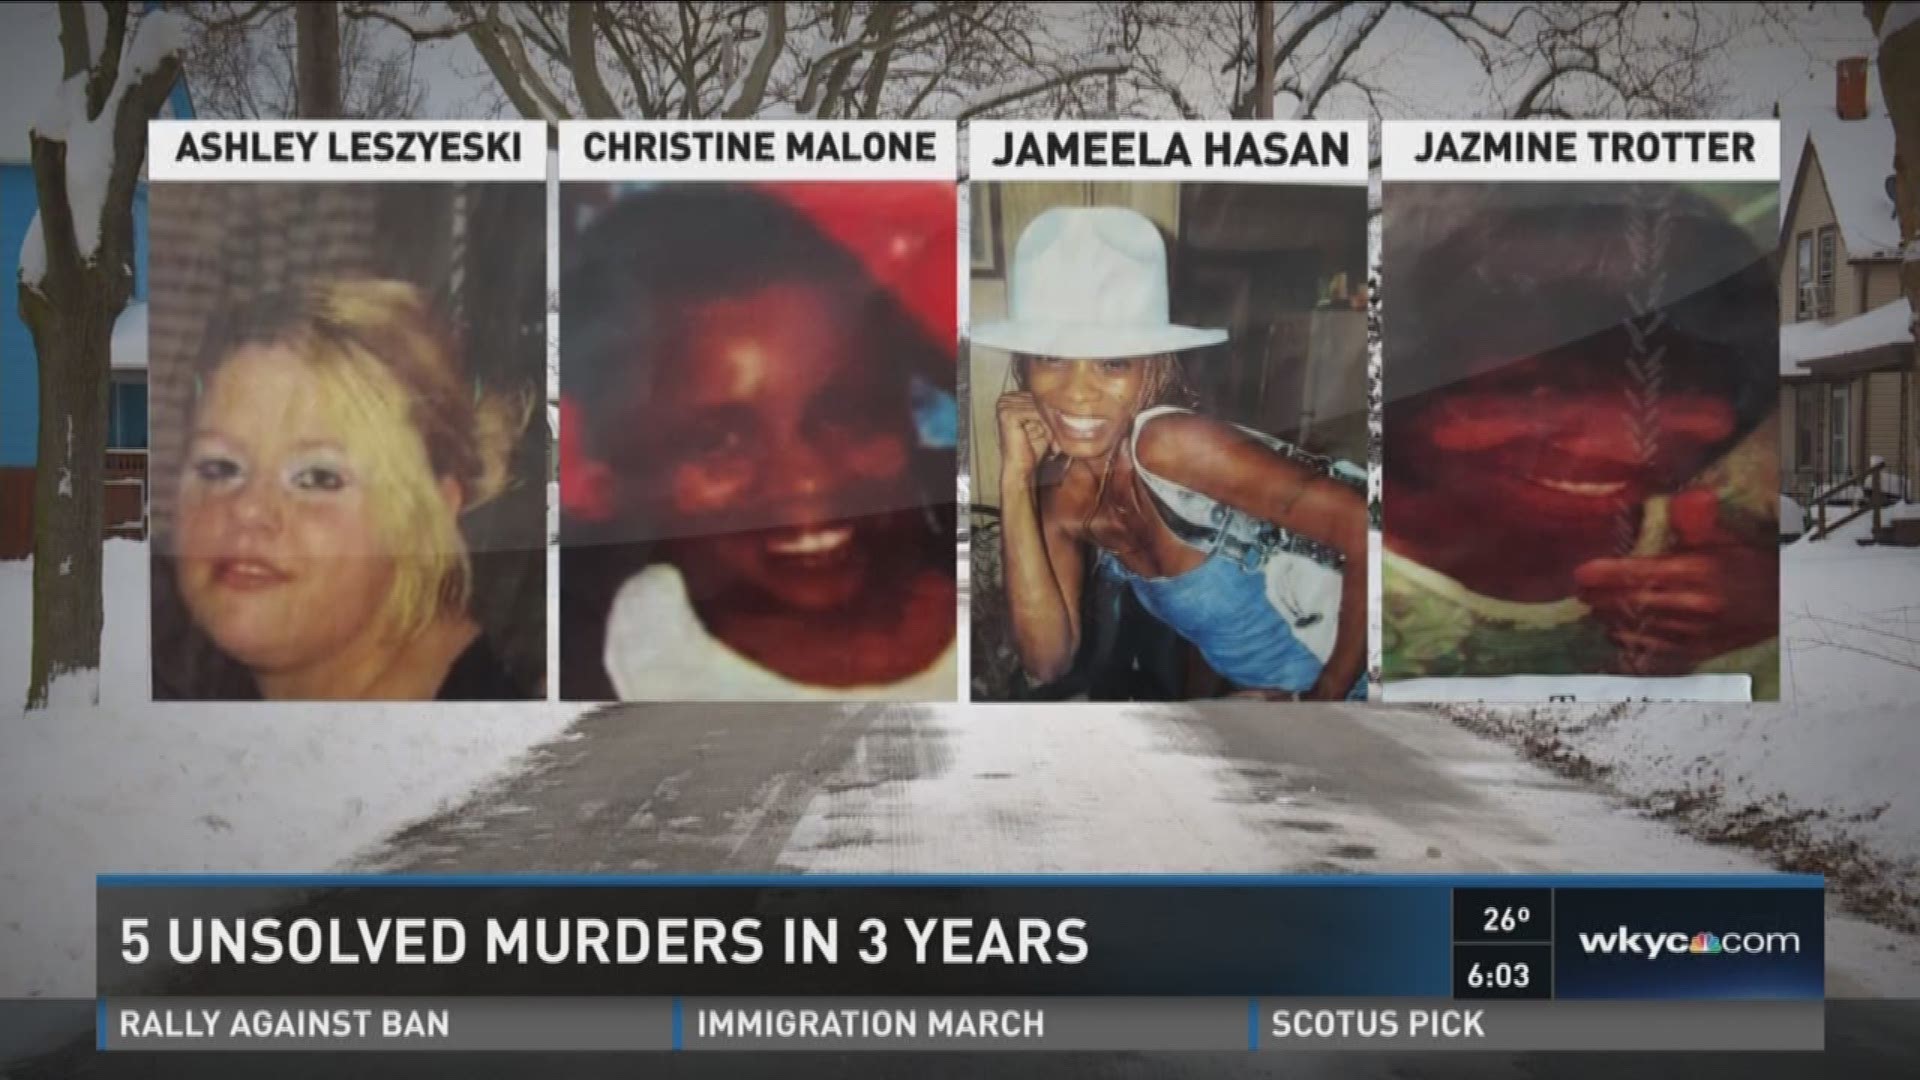 5 unsolved murders in 3 years